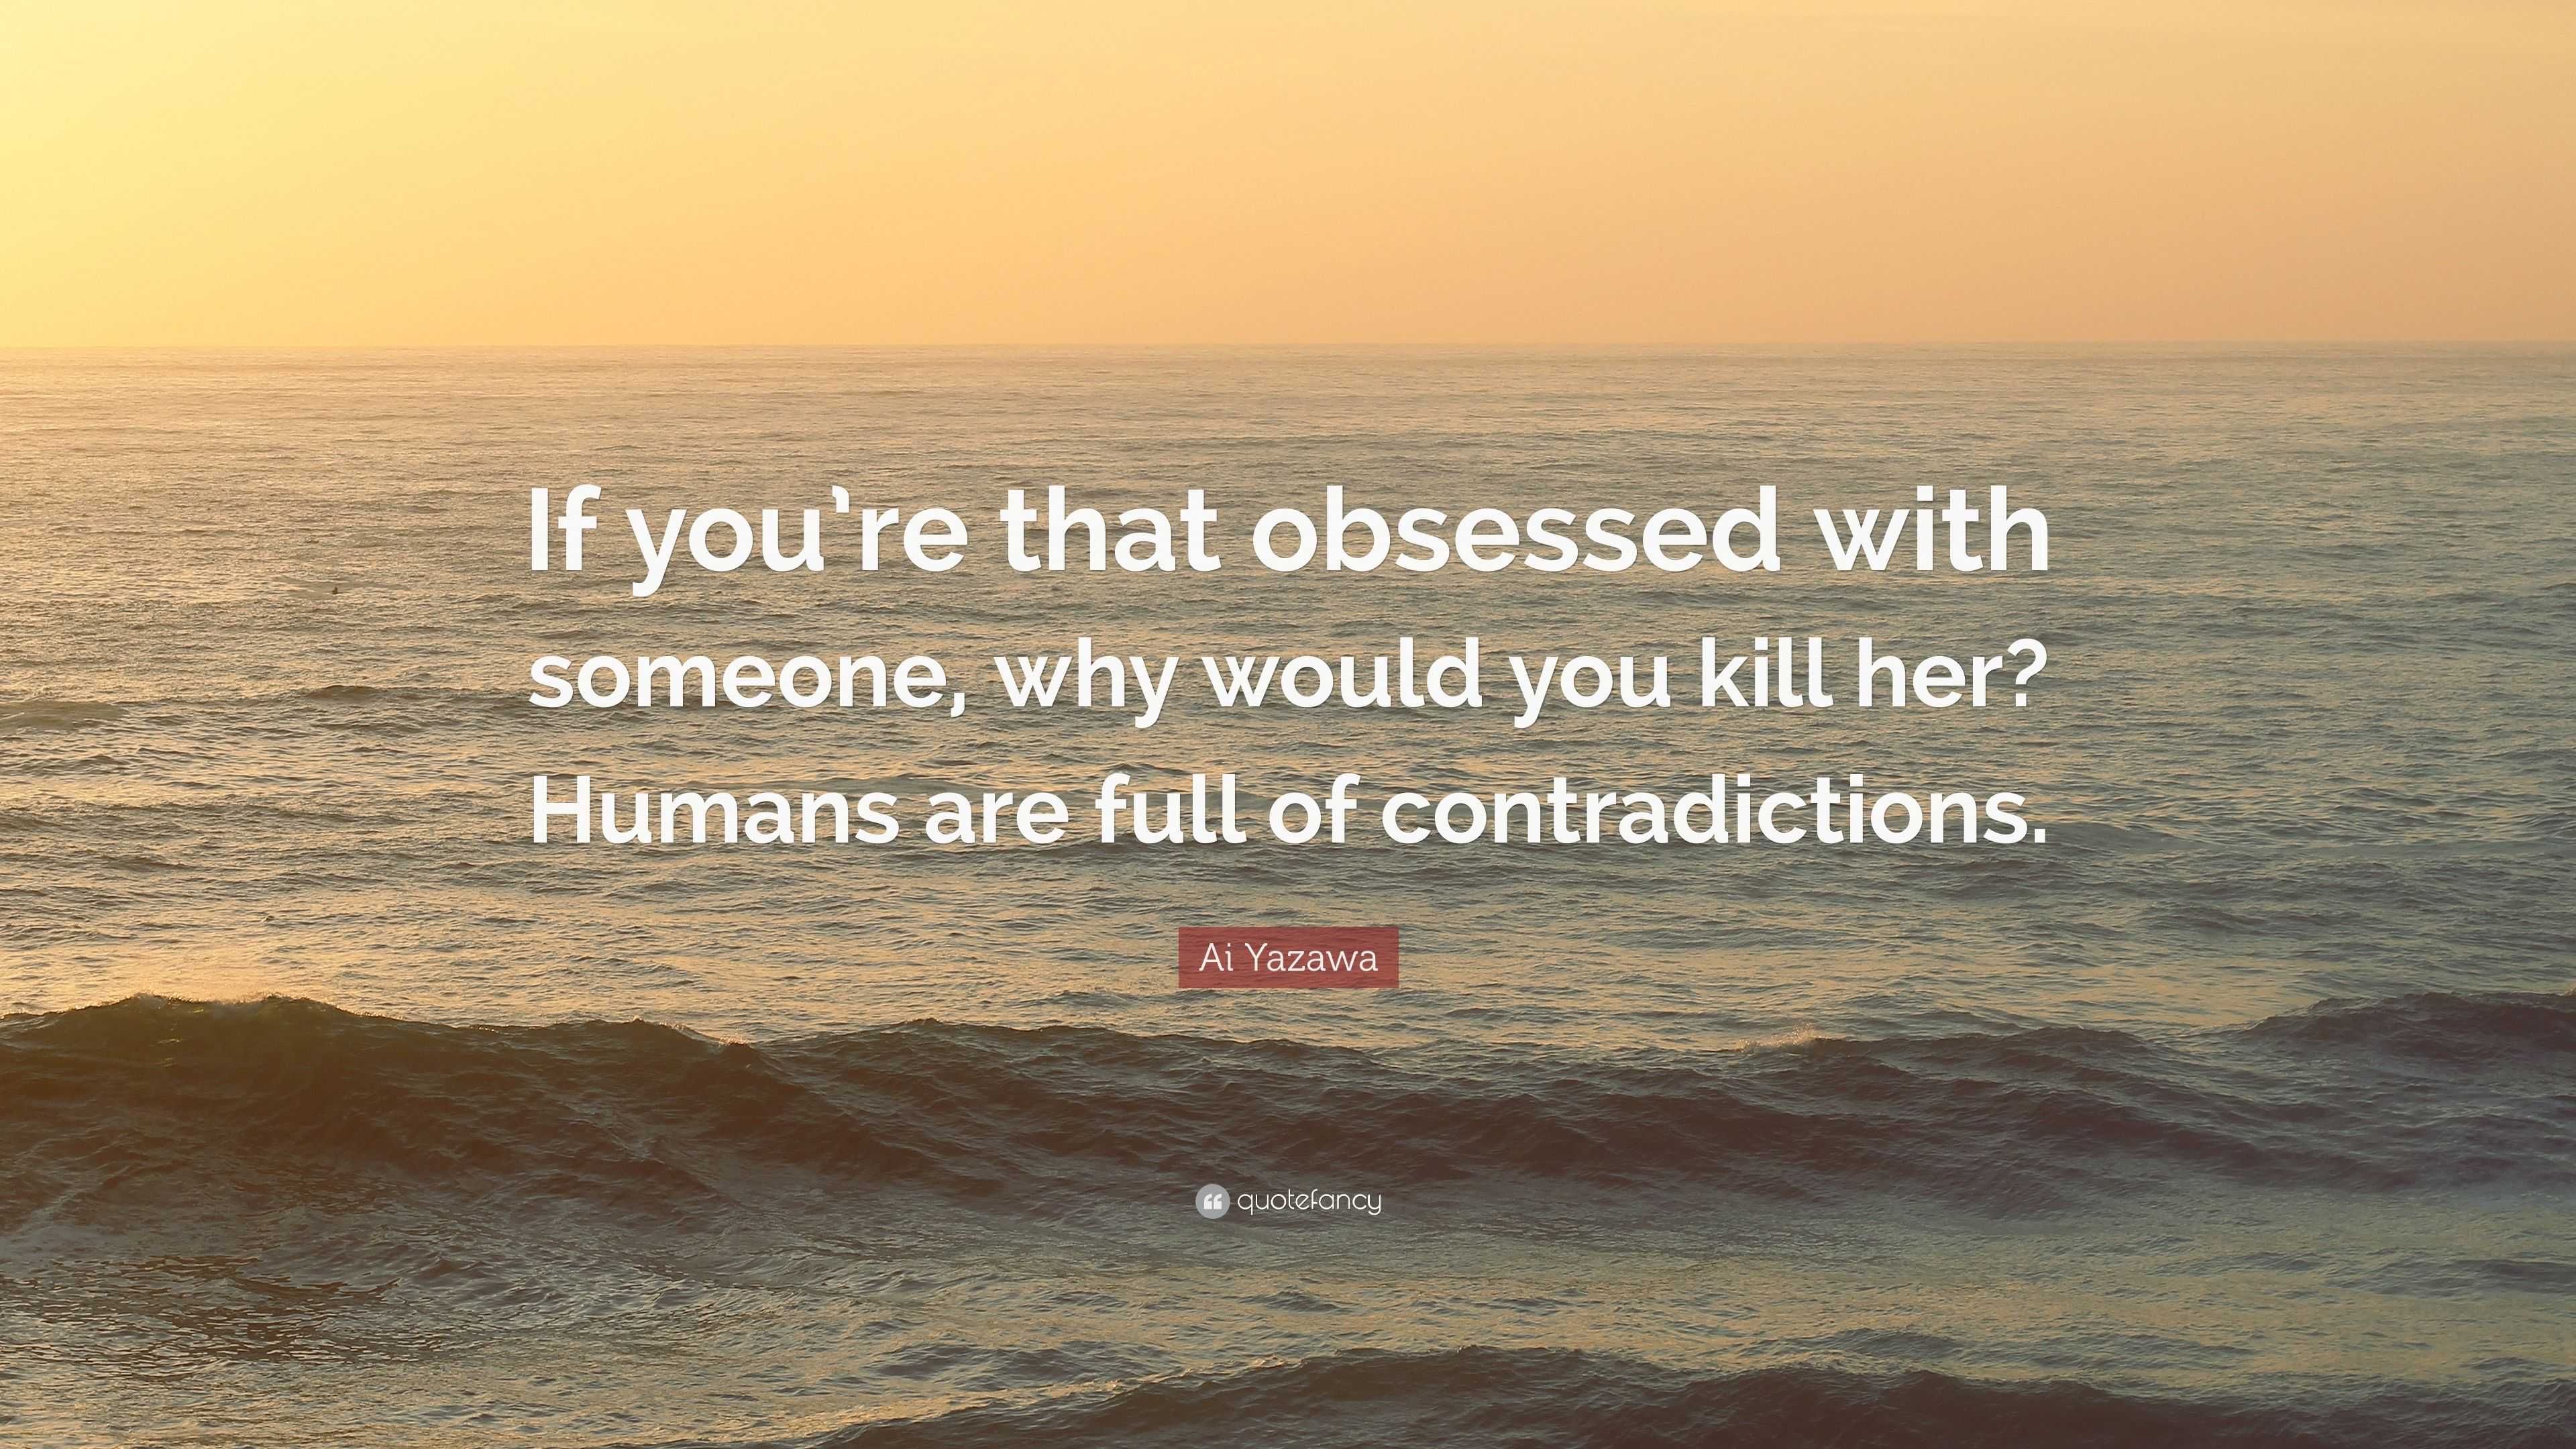 Ai Yazawa Quote: “If you’re that obsessed with someone, why would you ...